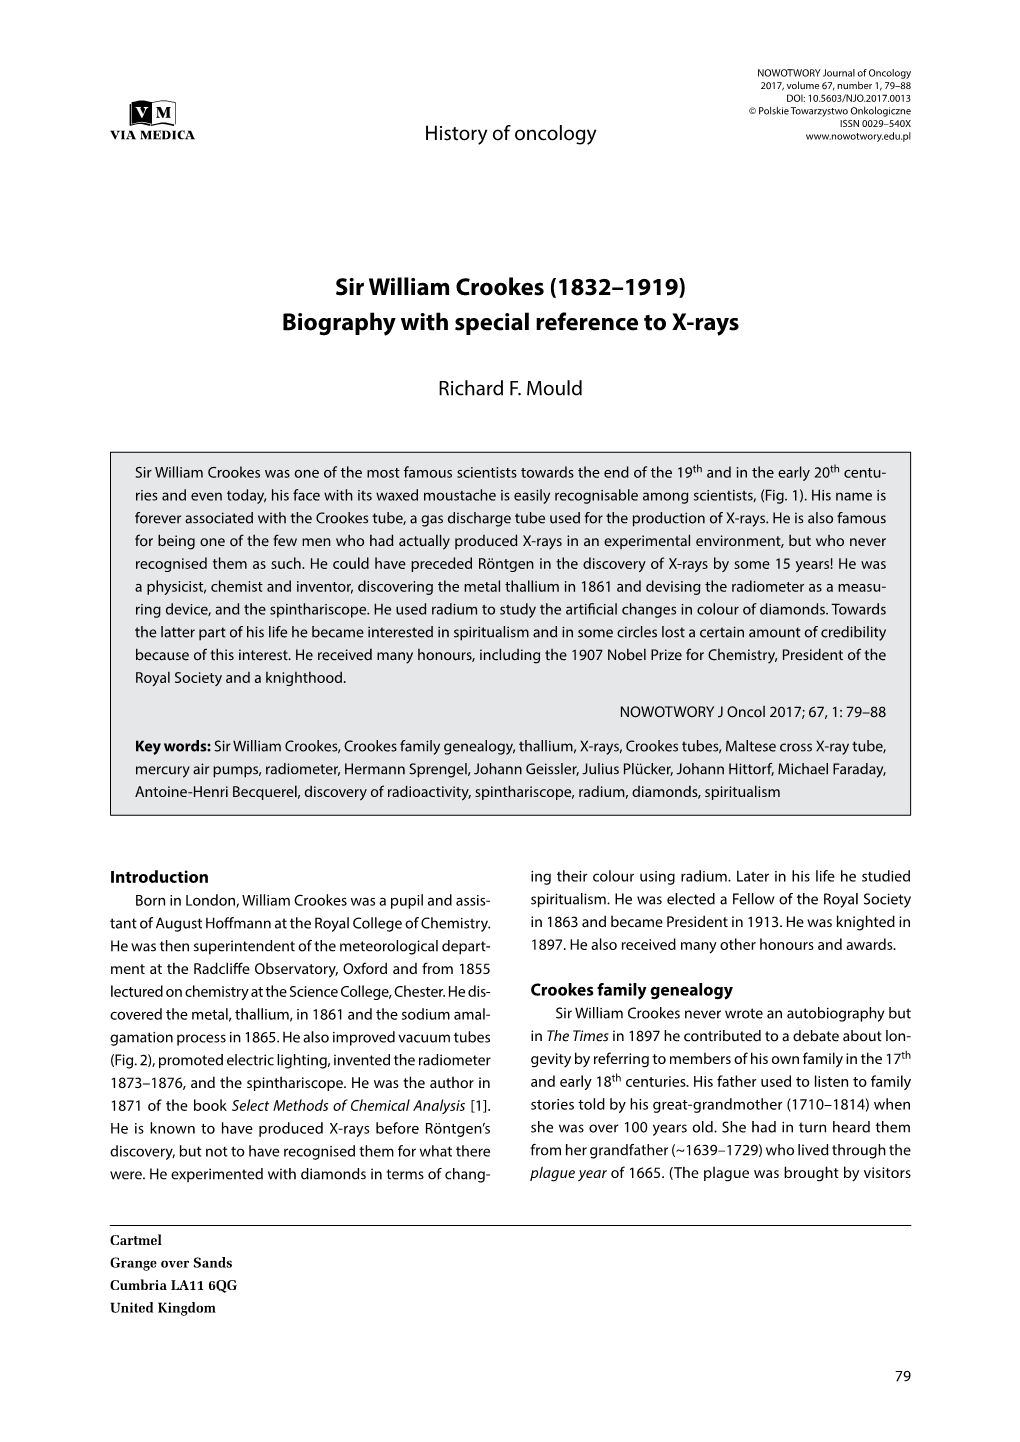 Sir William Crookes (1832–1919) Biography with Special Reference to X-Rays